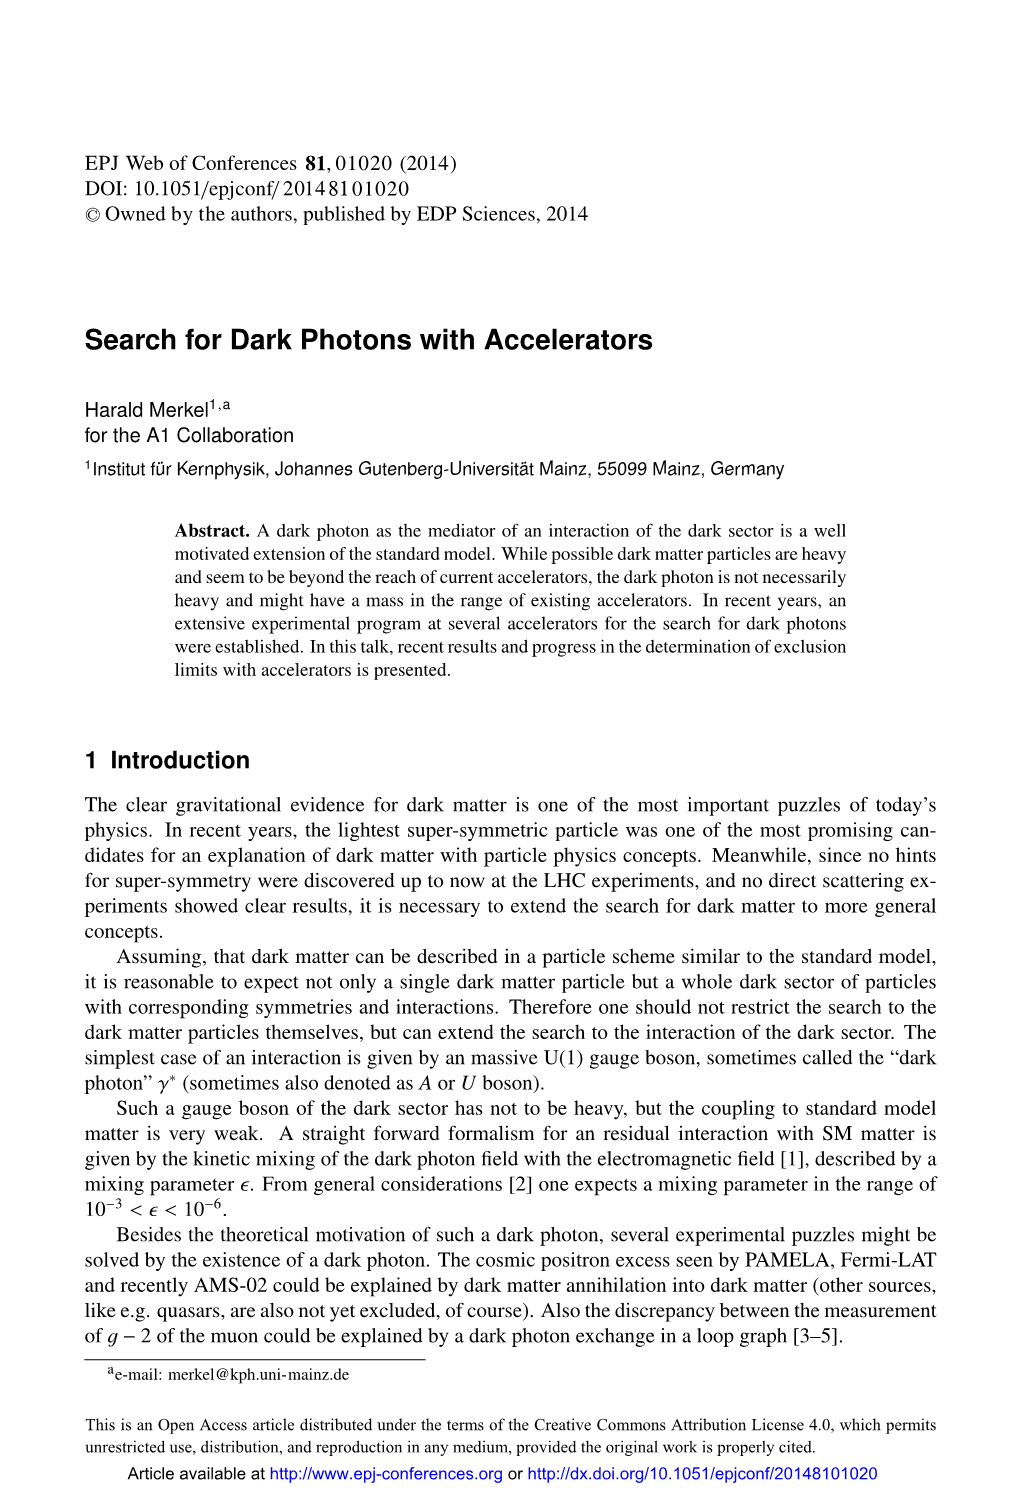 Search for Dark Photons with Accelerators